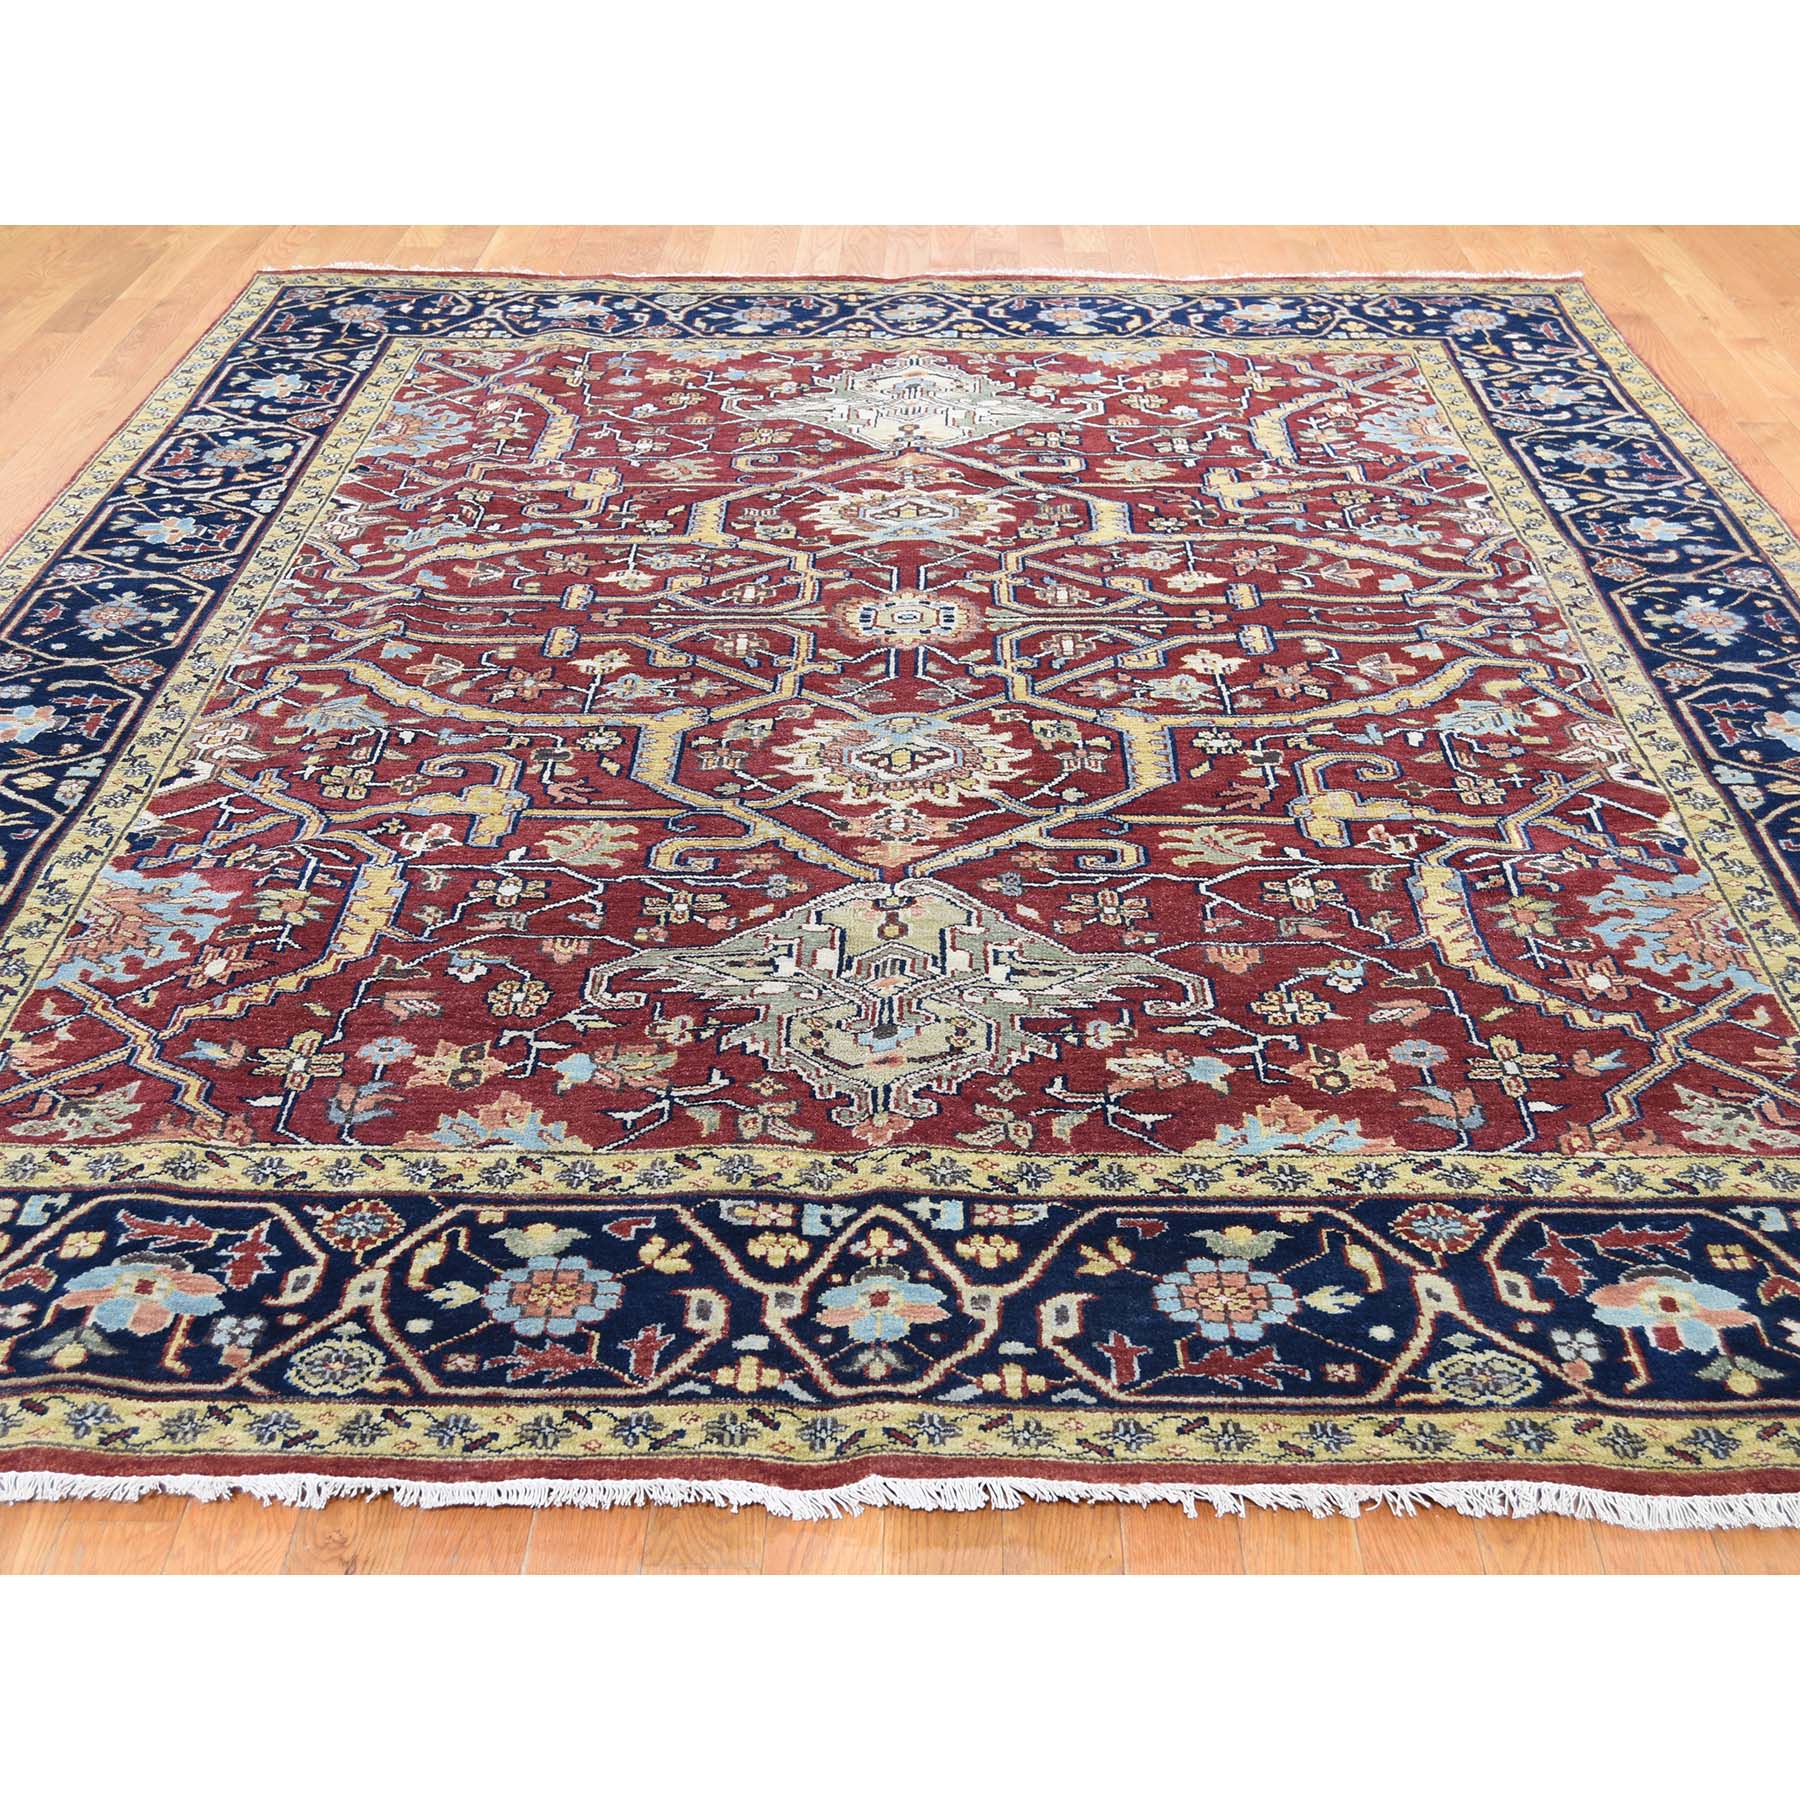 8-x10-3  Red Heriz Revival Pure Wool Hand-Knotted Oriental Rug 